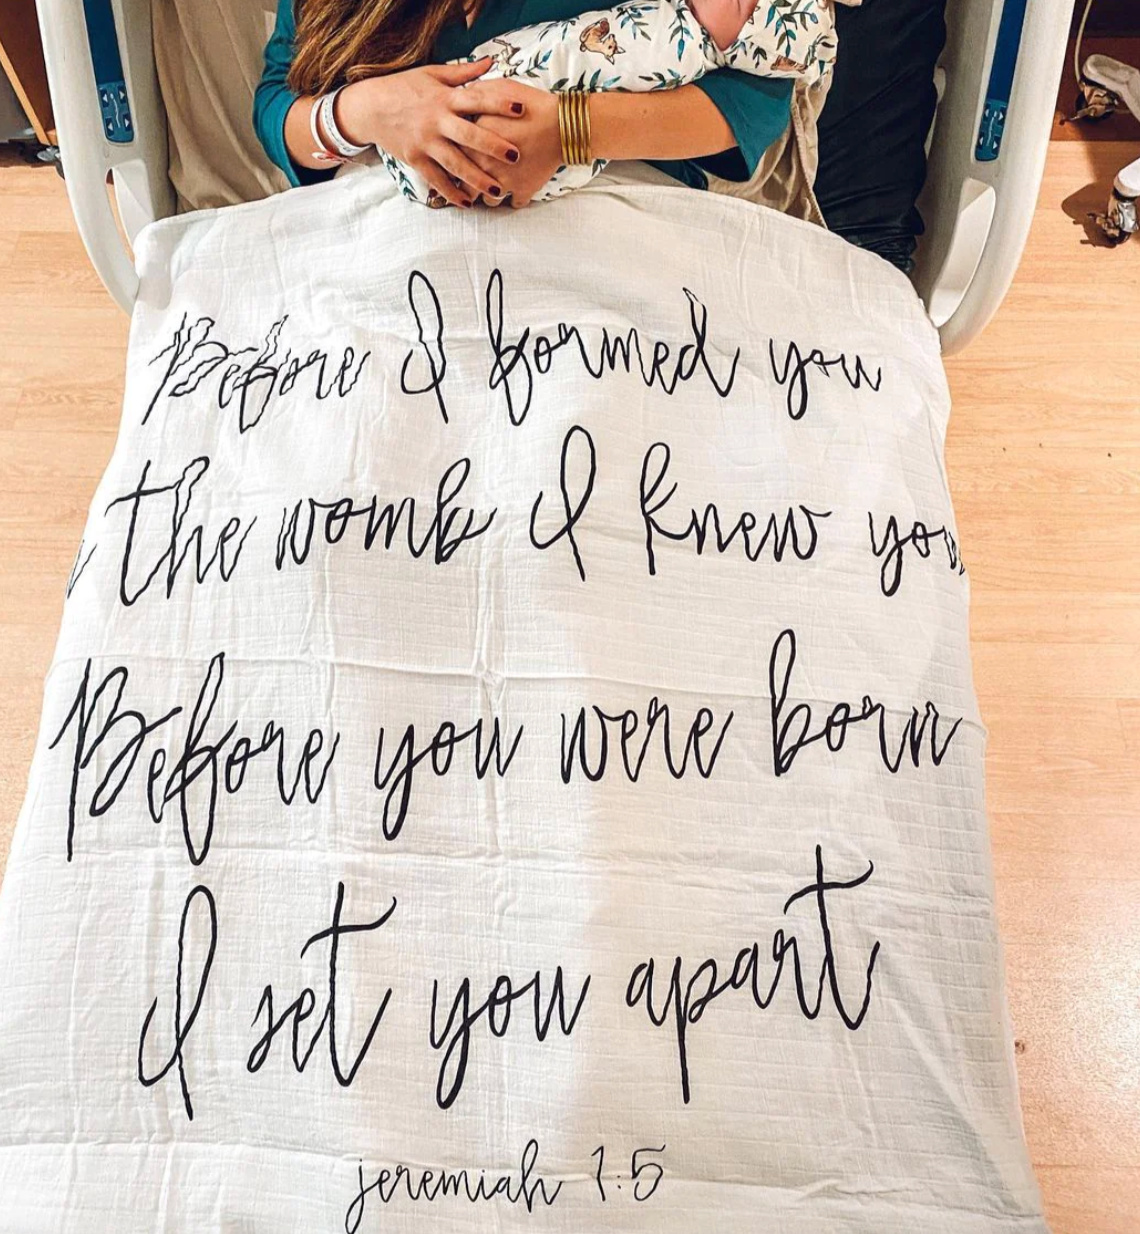 "BEFORE I FORMED YOU" SWADDLE BLANKET (Jeremiah 1:5)